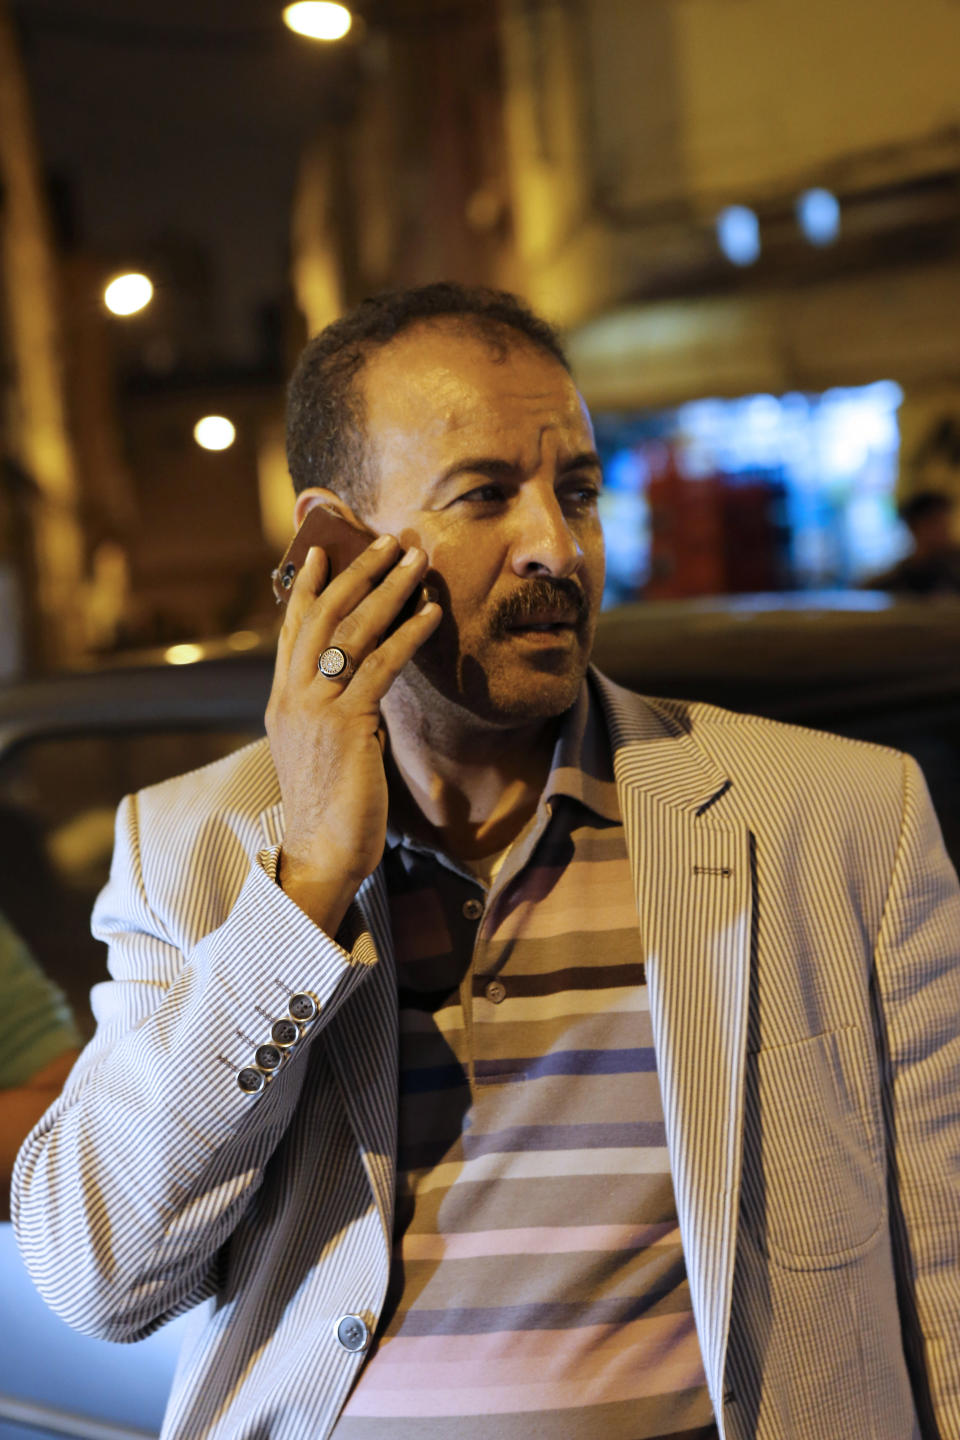 This Wednesday April 30, 2014 photo shows Moroccan police officer Abdelillah Saouti speaking with his cell phone during a patrol in Casablanca, Morocco. Never has a police officer had as much praise by Moroccans. Abdelillah Saouti has become a star in Casablanca after he cleaned several dangerous neighborhoods, and 21,000 fans have even created a page for him on Facebook.(AP Photo / Abdeljalil Bounhar)